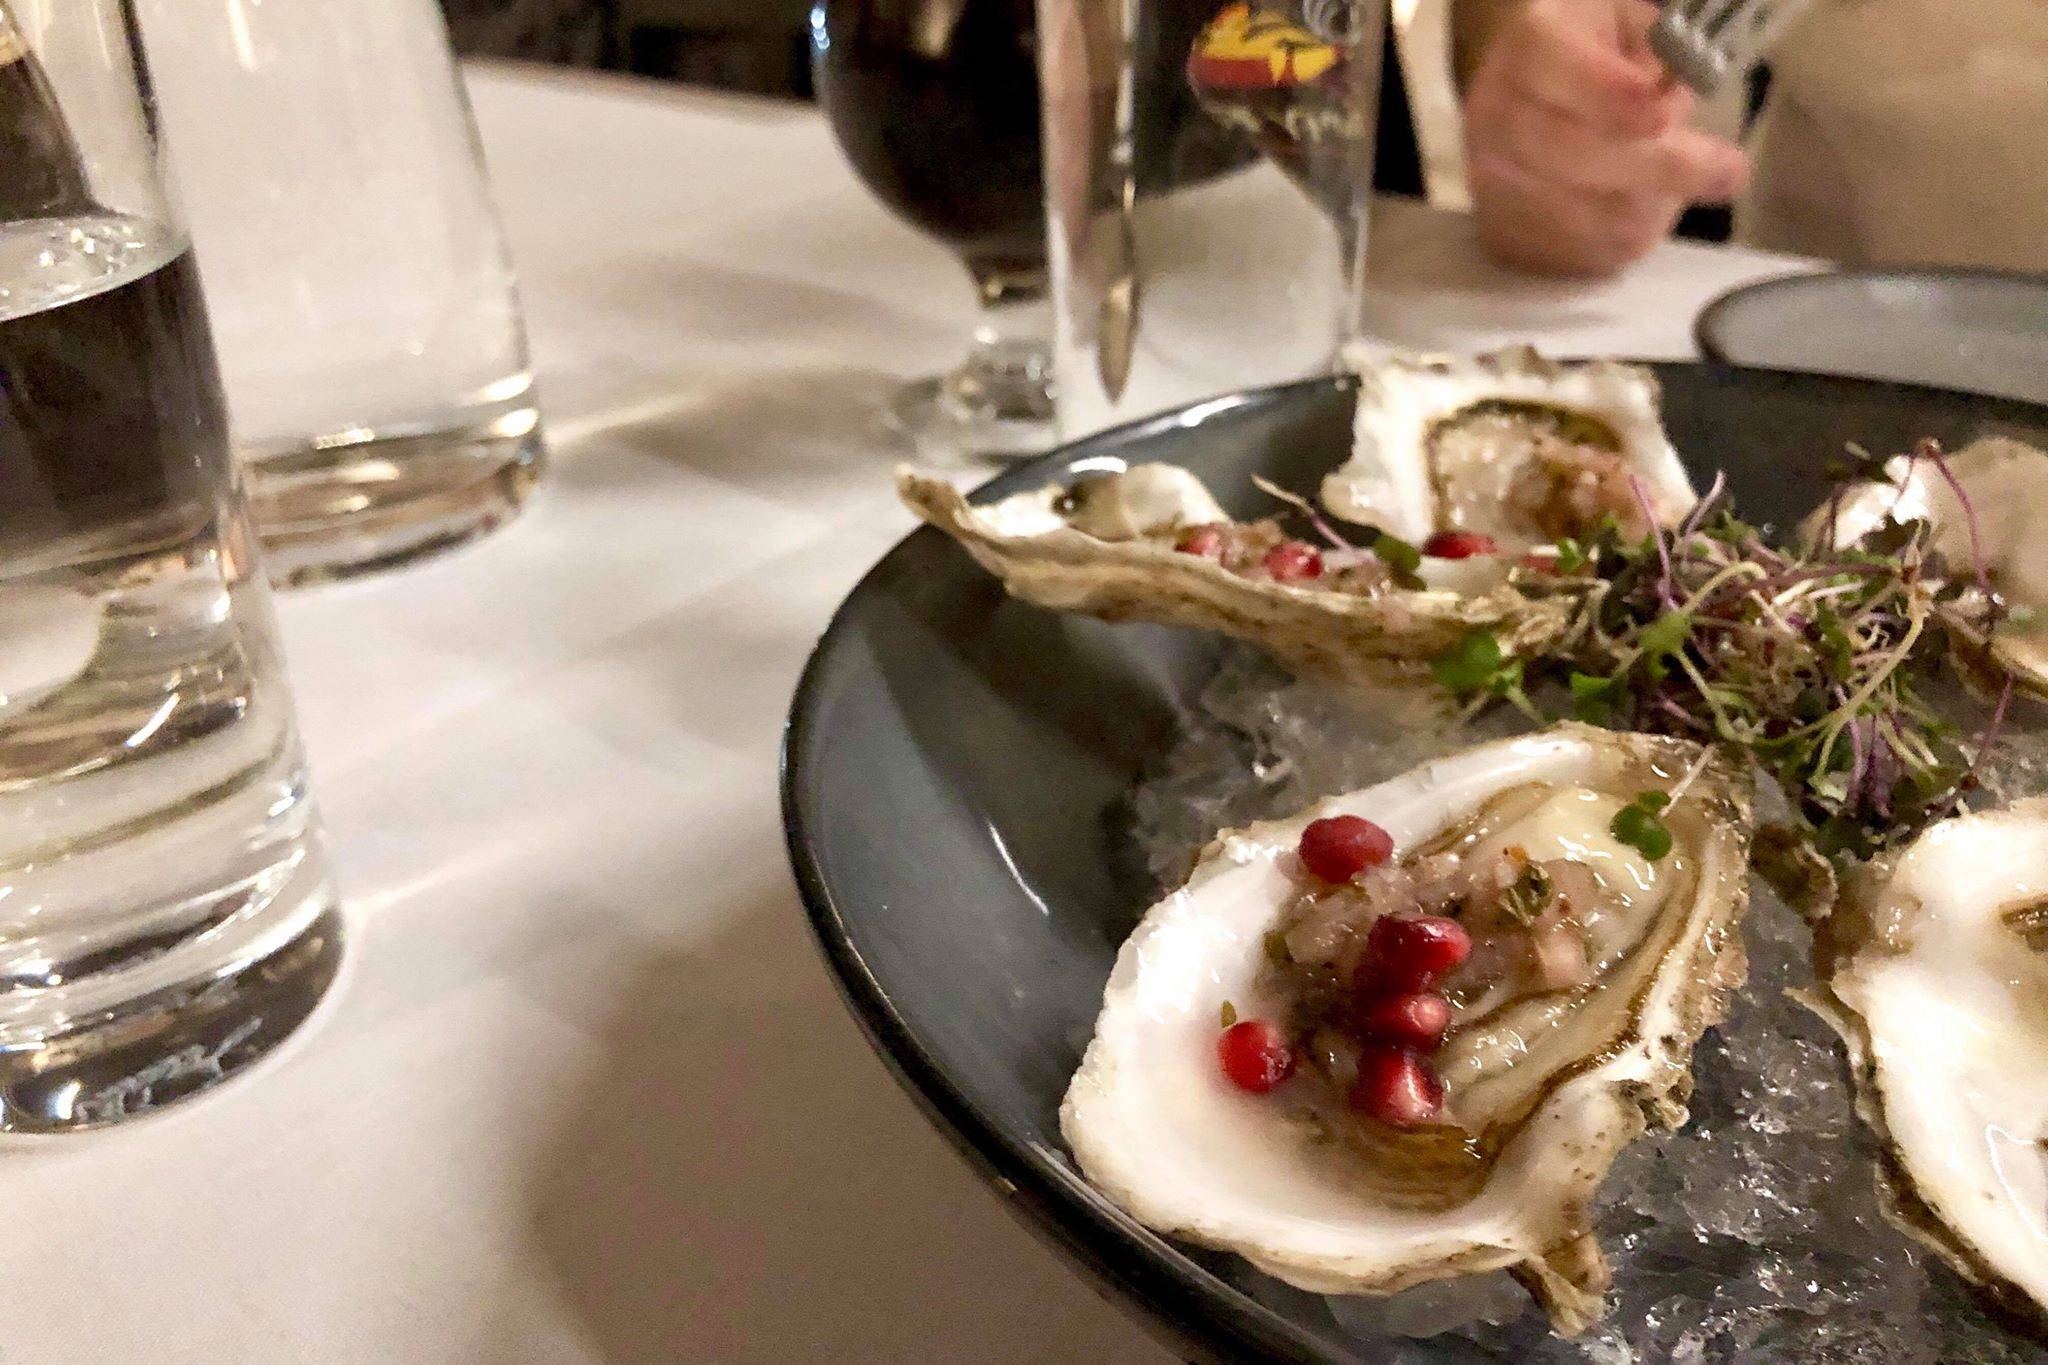 Addie Camp Train Eatery and Wine Bar strive to feature local food on their menu as much as possible, like oysters from Jacalof Bay, on Monday, Dec. 31, 2018, in Soldotna, Alaska. (Photo by Victoria Petersen/Peninsula Clarion)